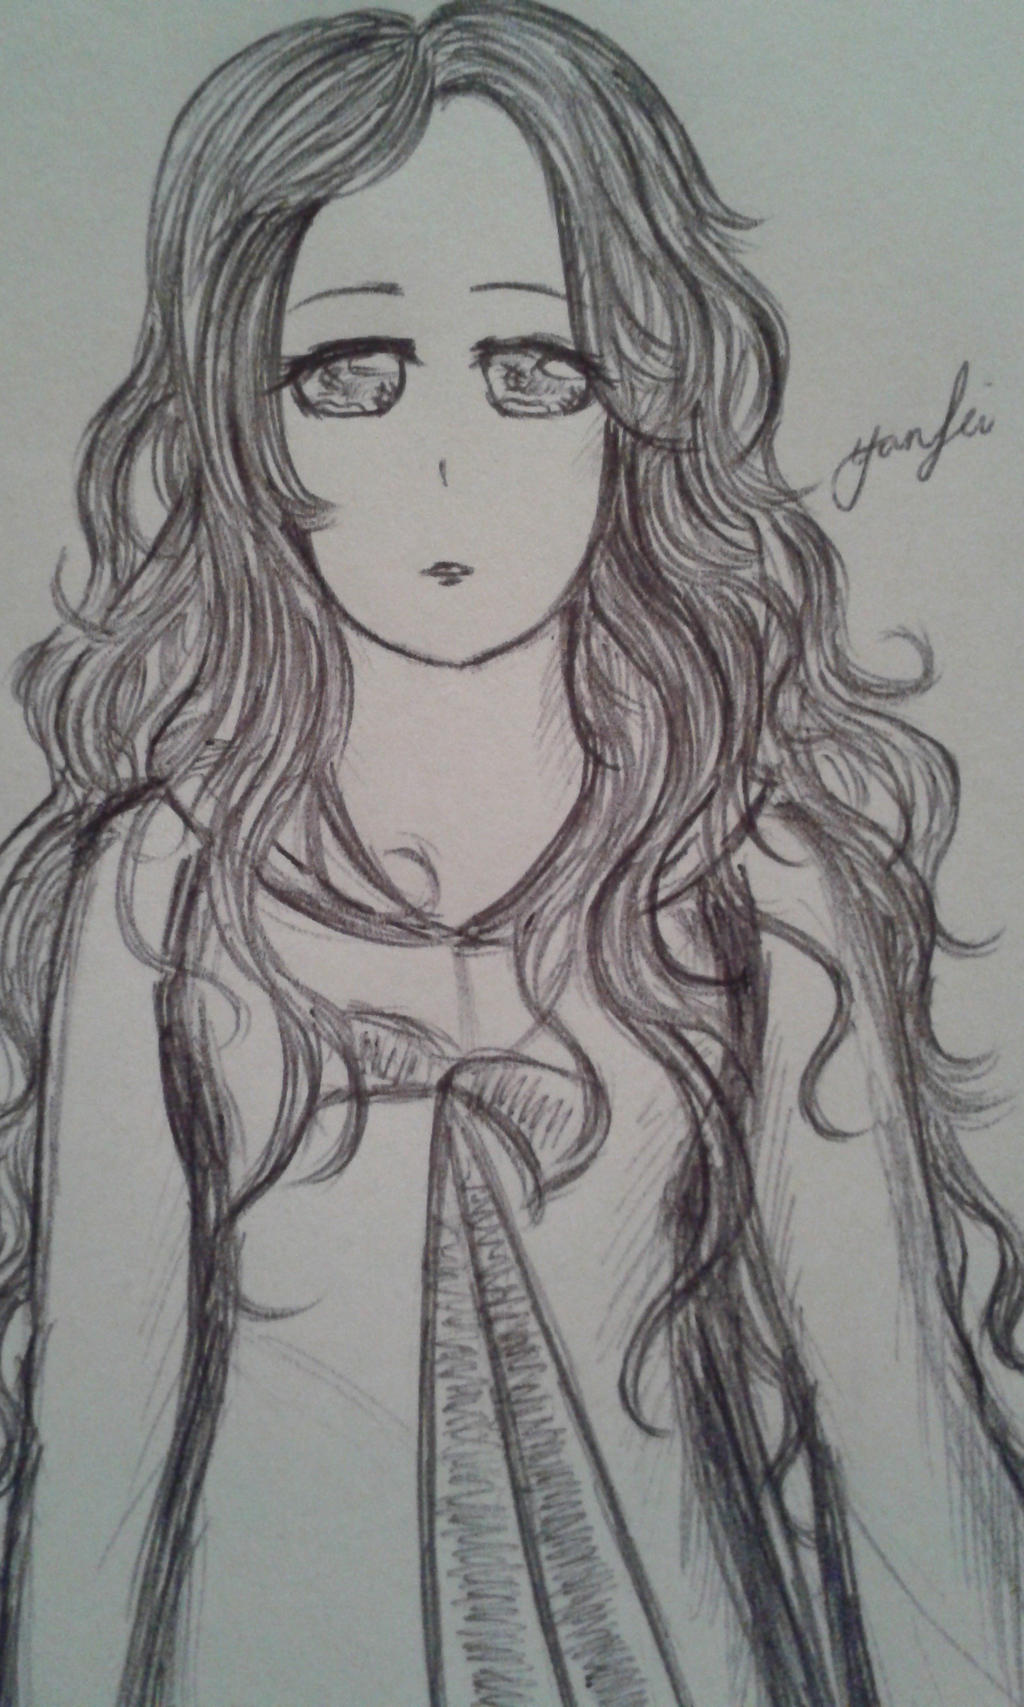 pencil sketch of an anime girl with a curly hair